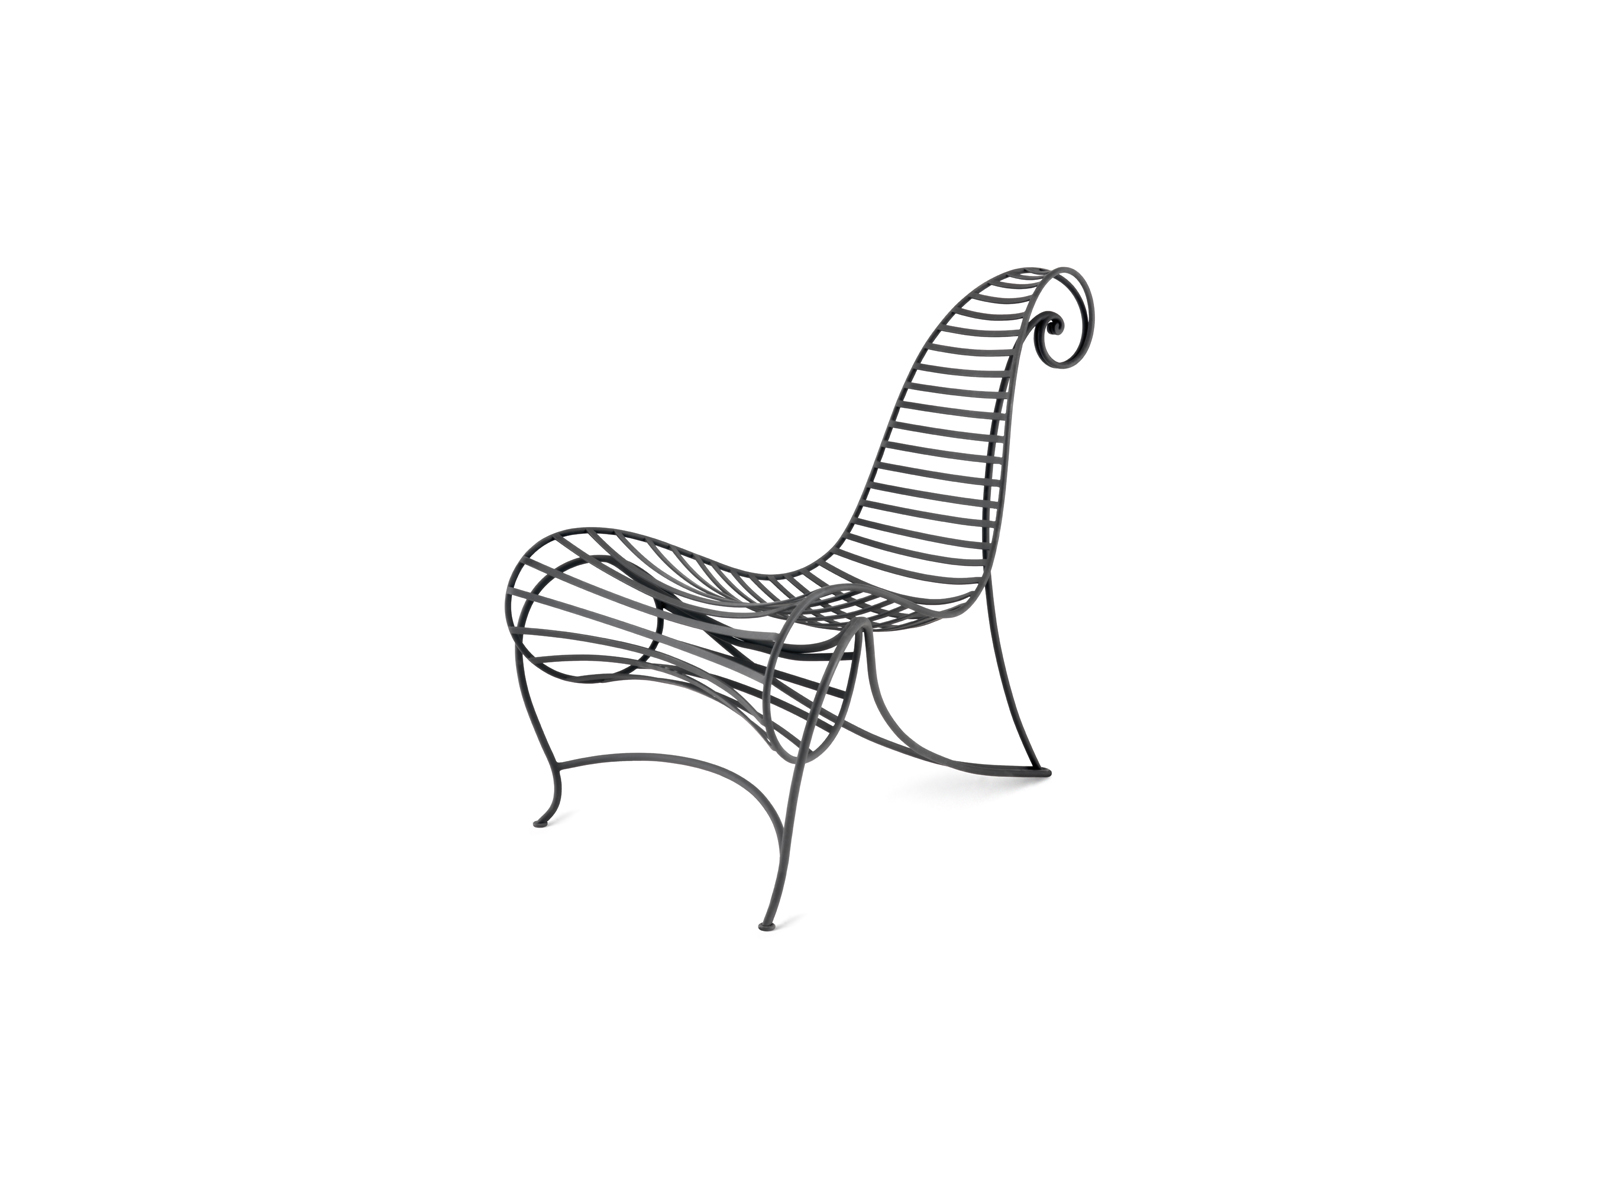 Spine Chair